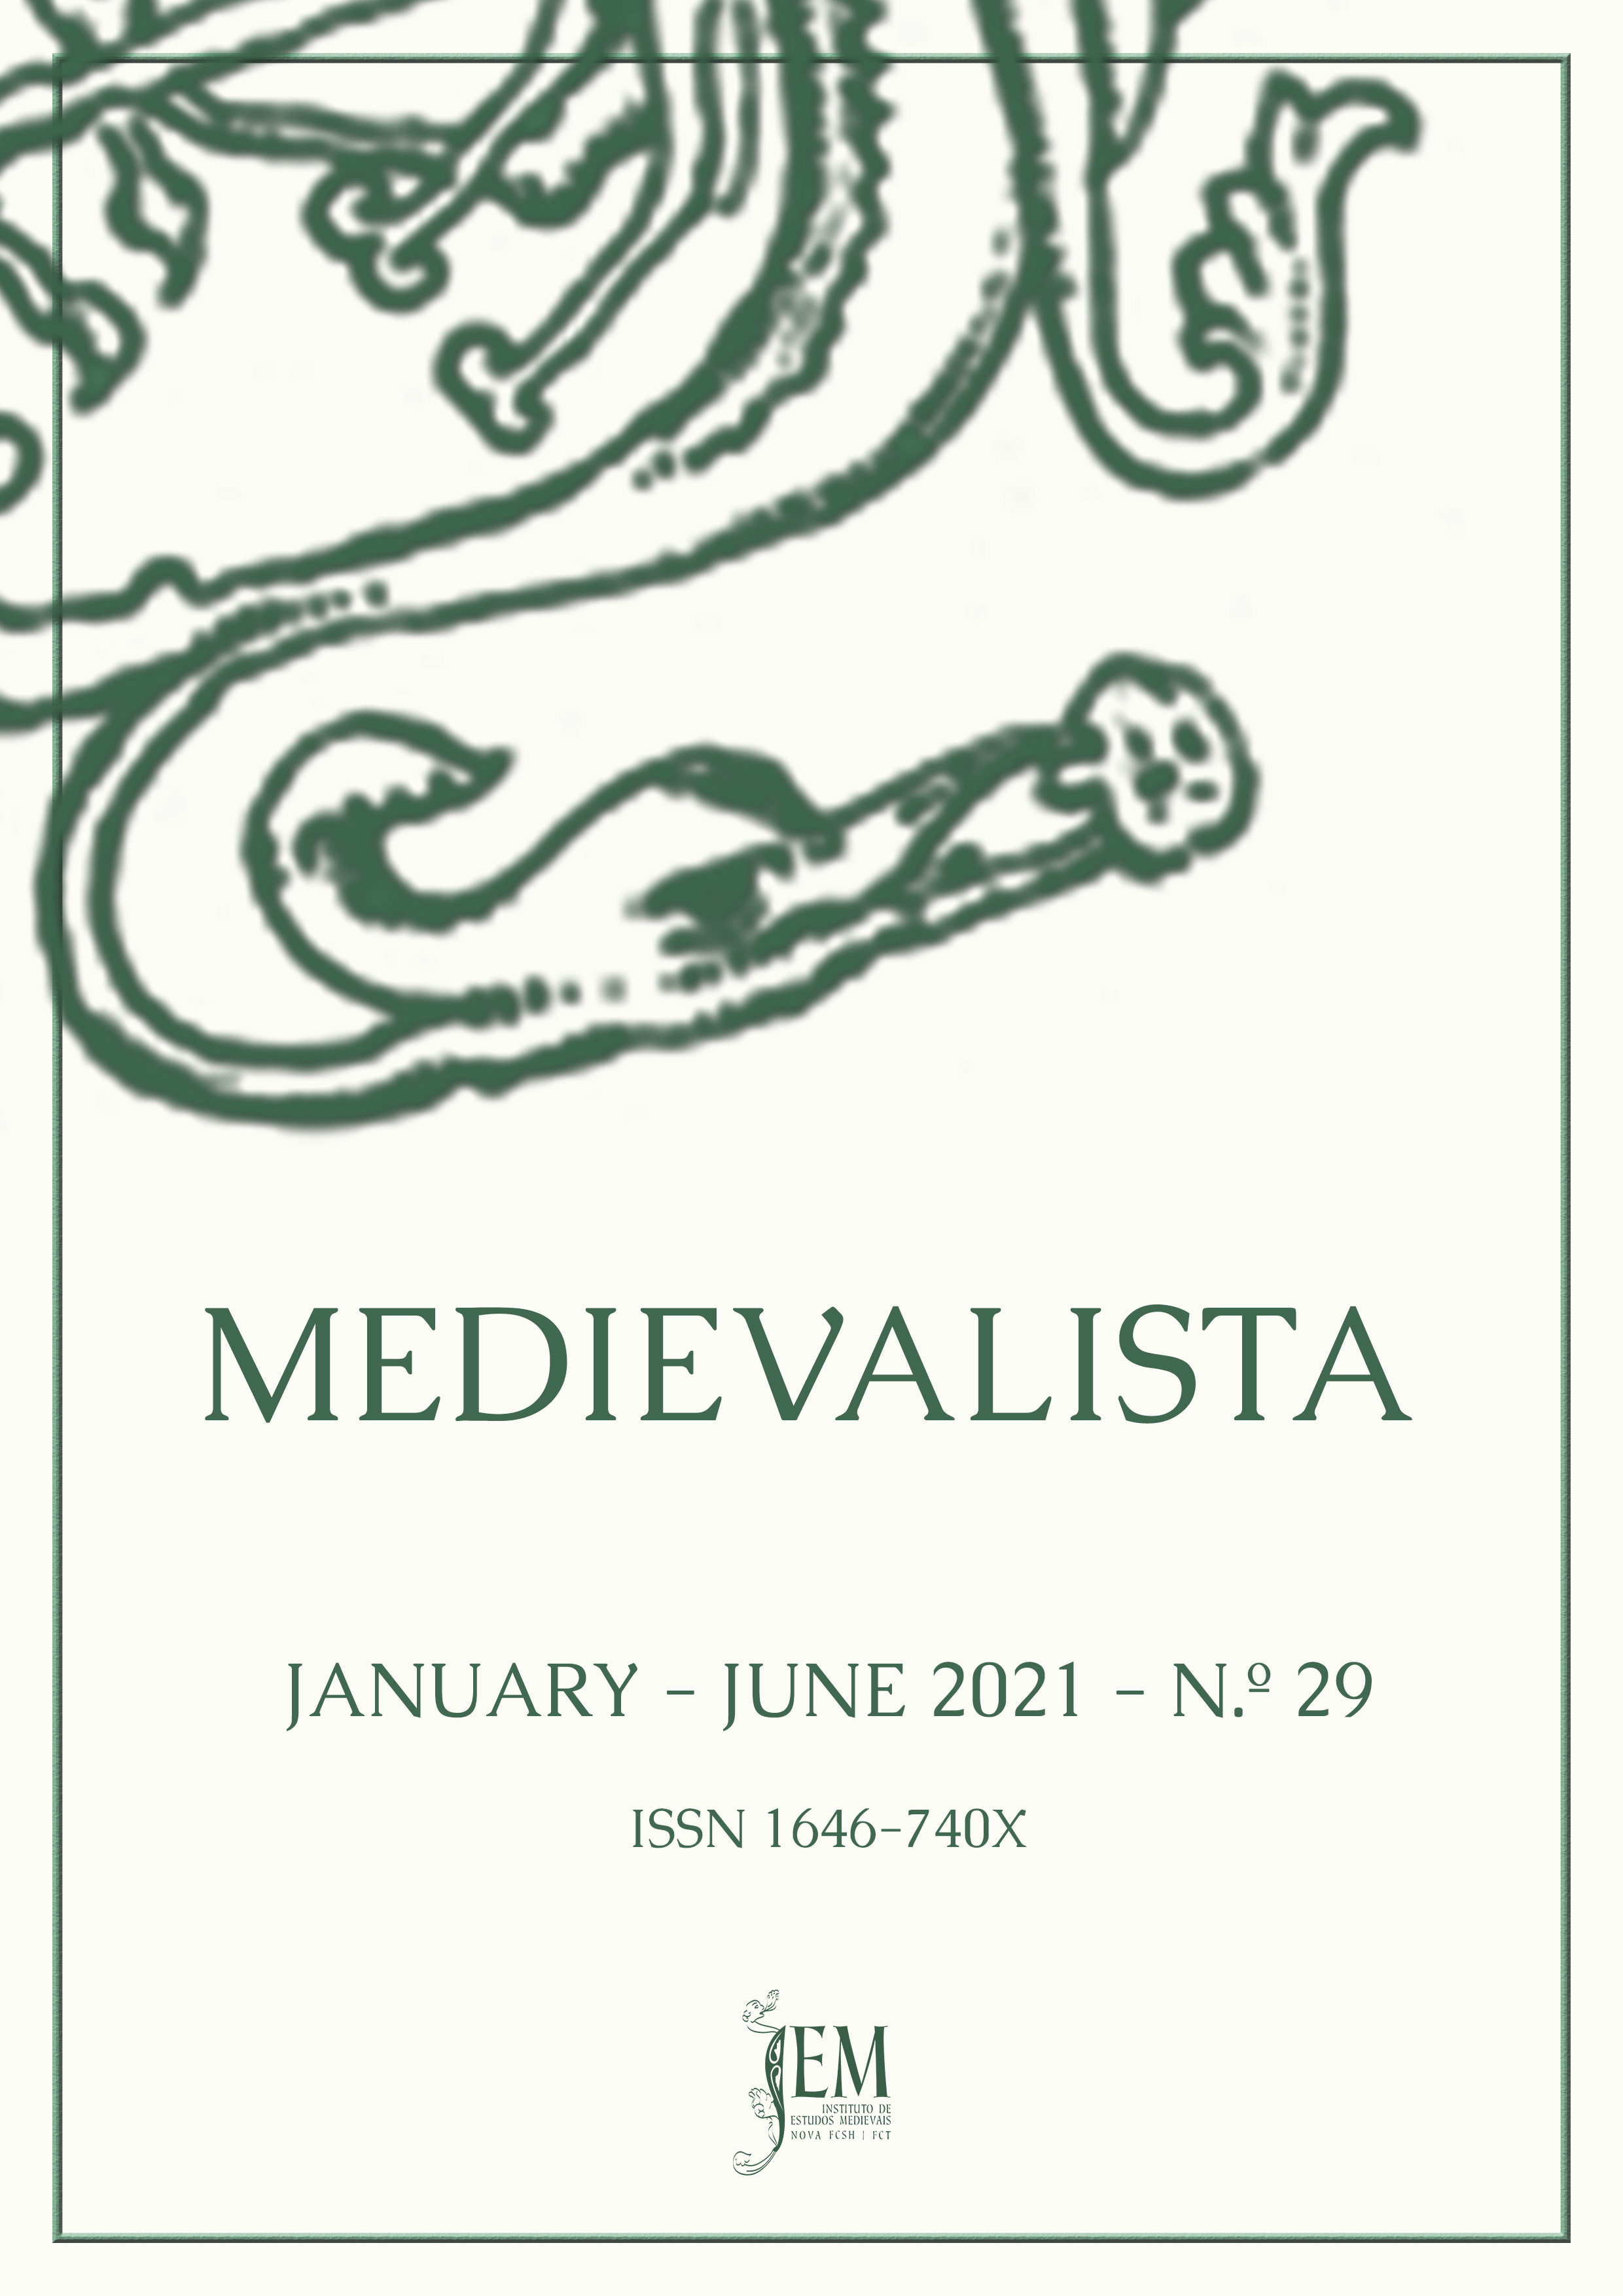 					View No. 29 (2021): Medievalista - "The Medieval Bestiary" Monograph
				